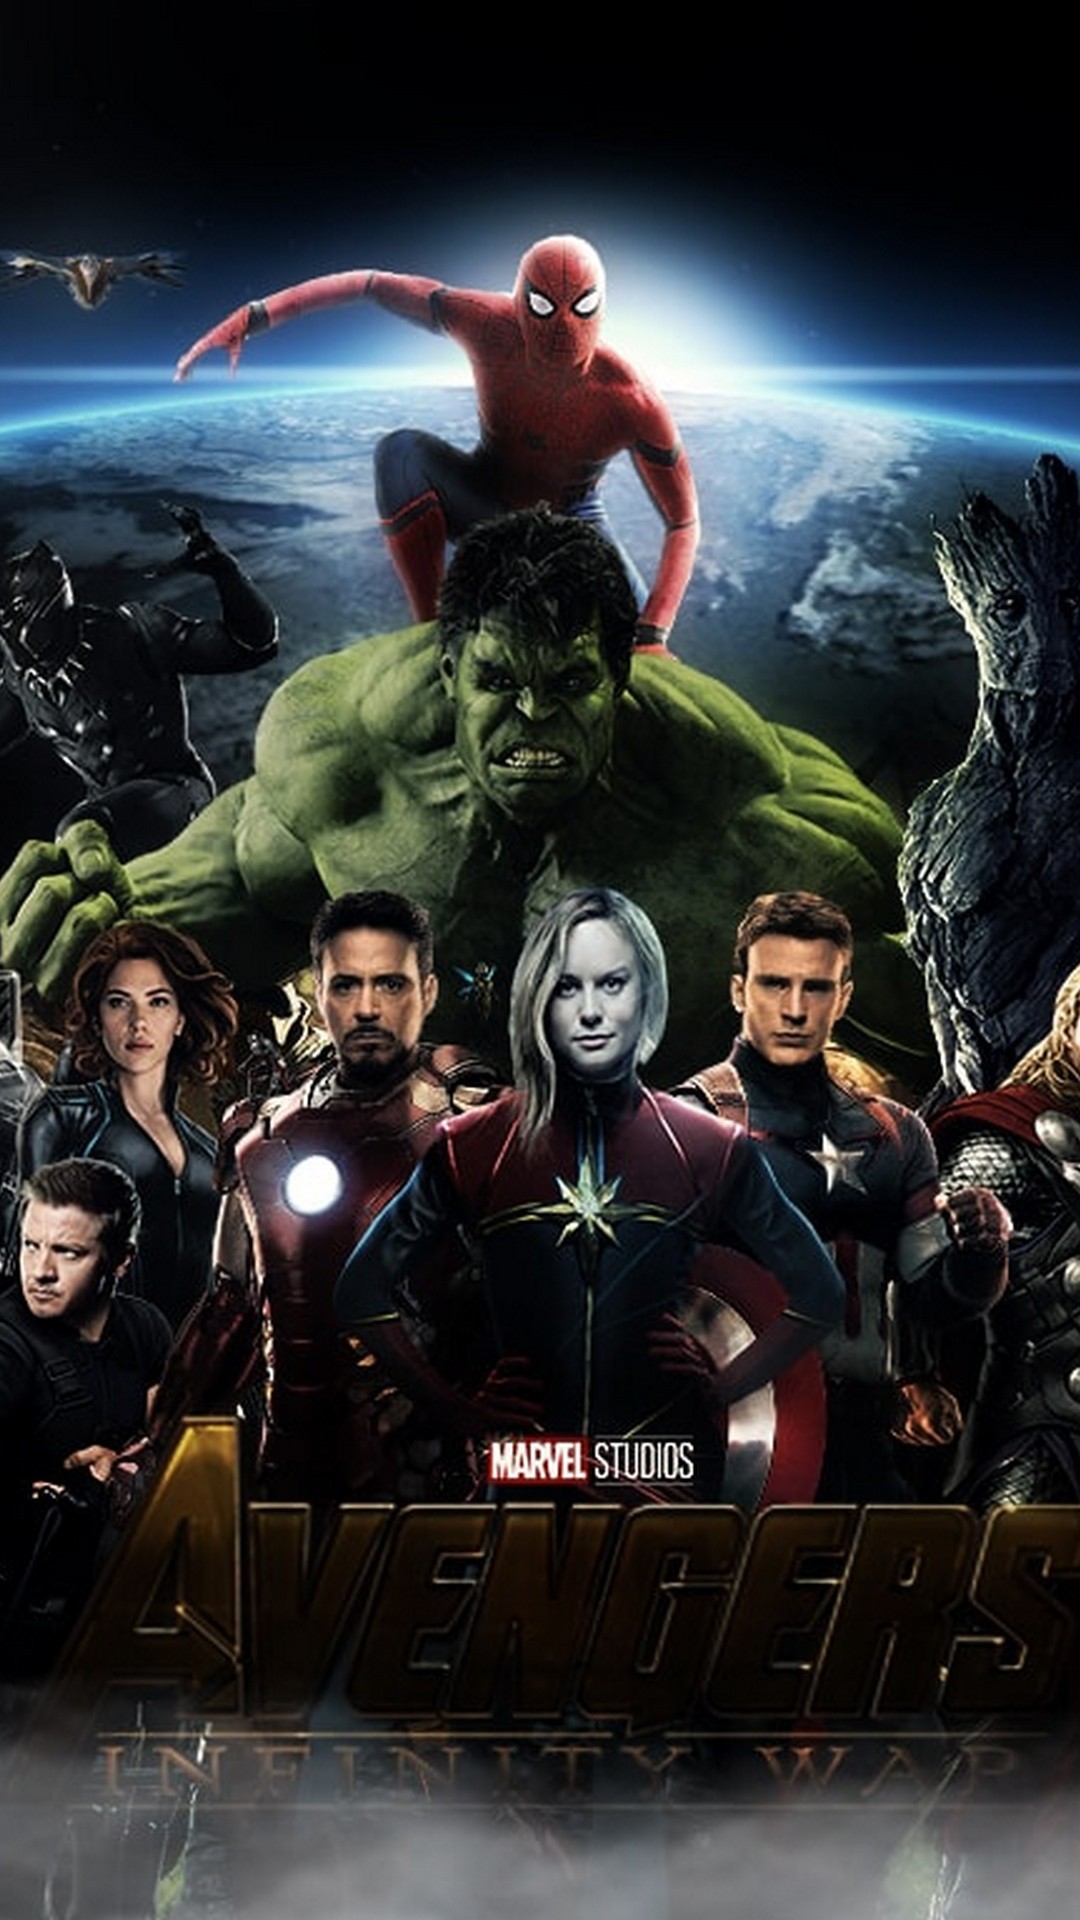 Avengers 3 Wallpaper For Android - 2021 Android Wallpapers